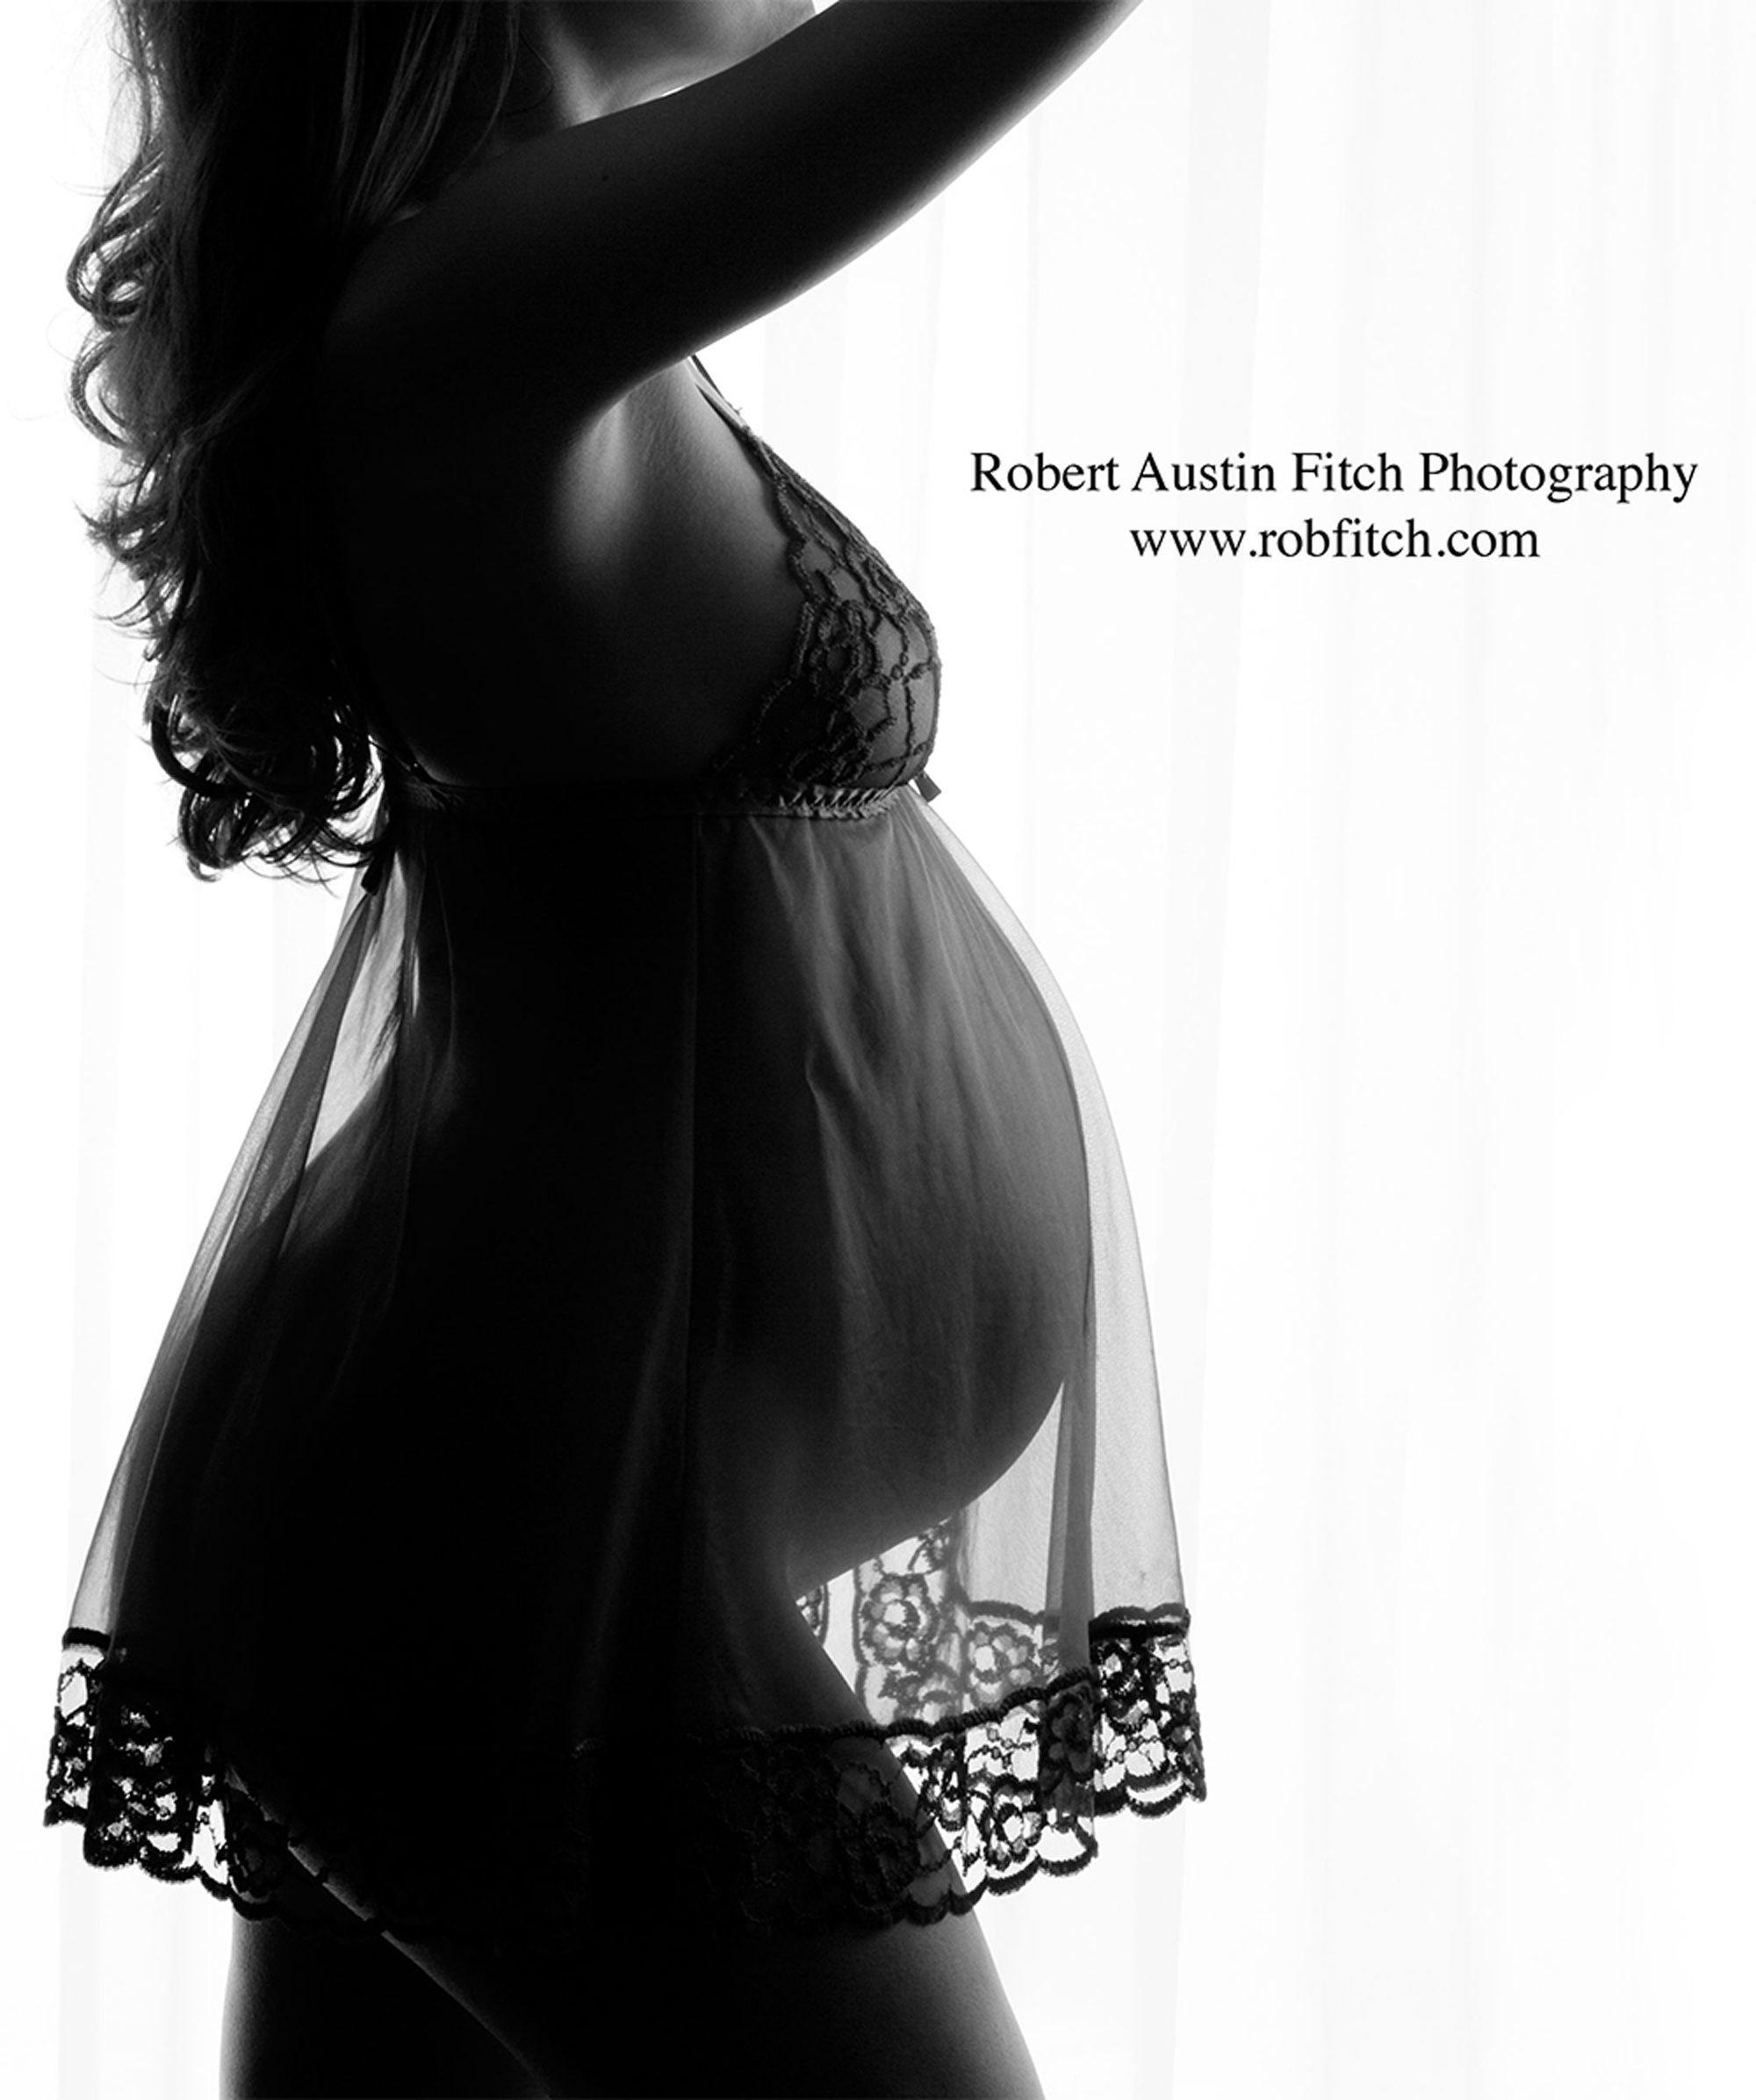 Black and white artistic silhouette maternity photograph